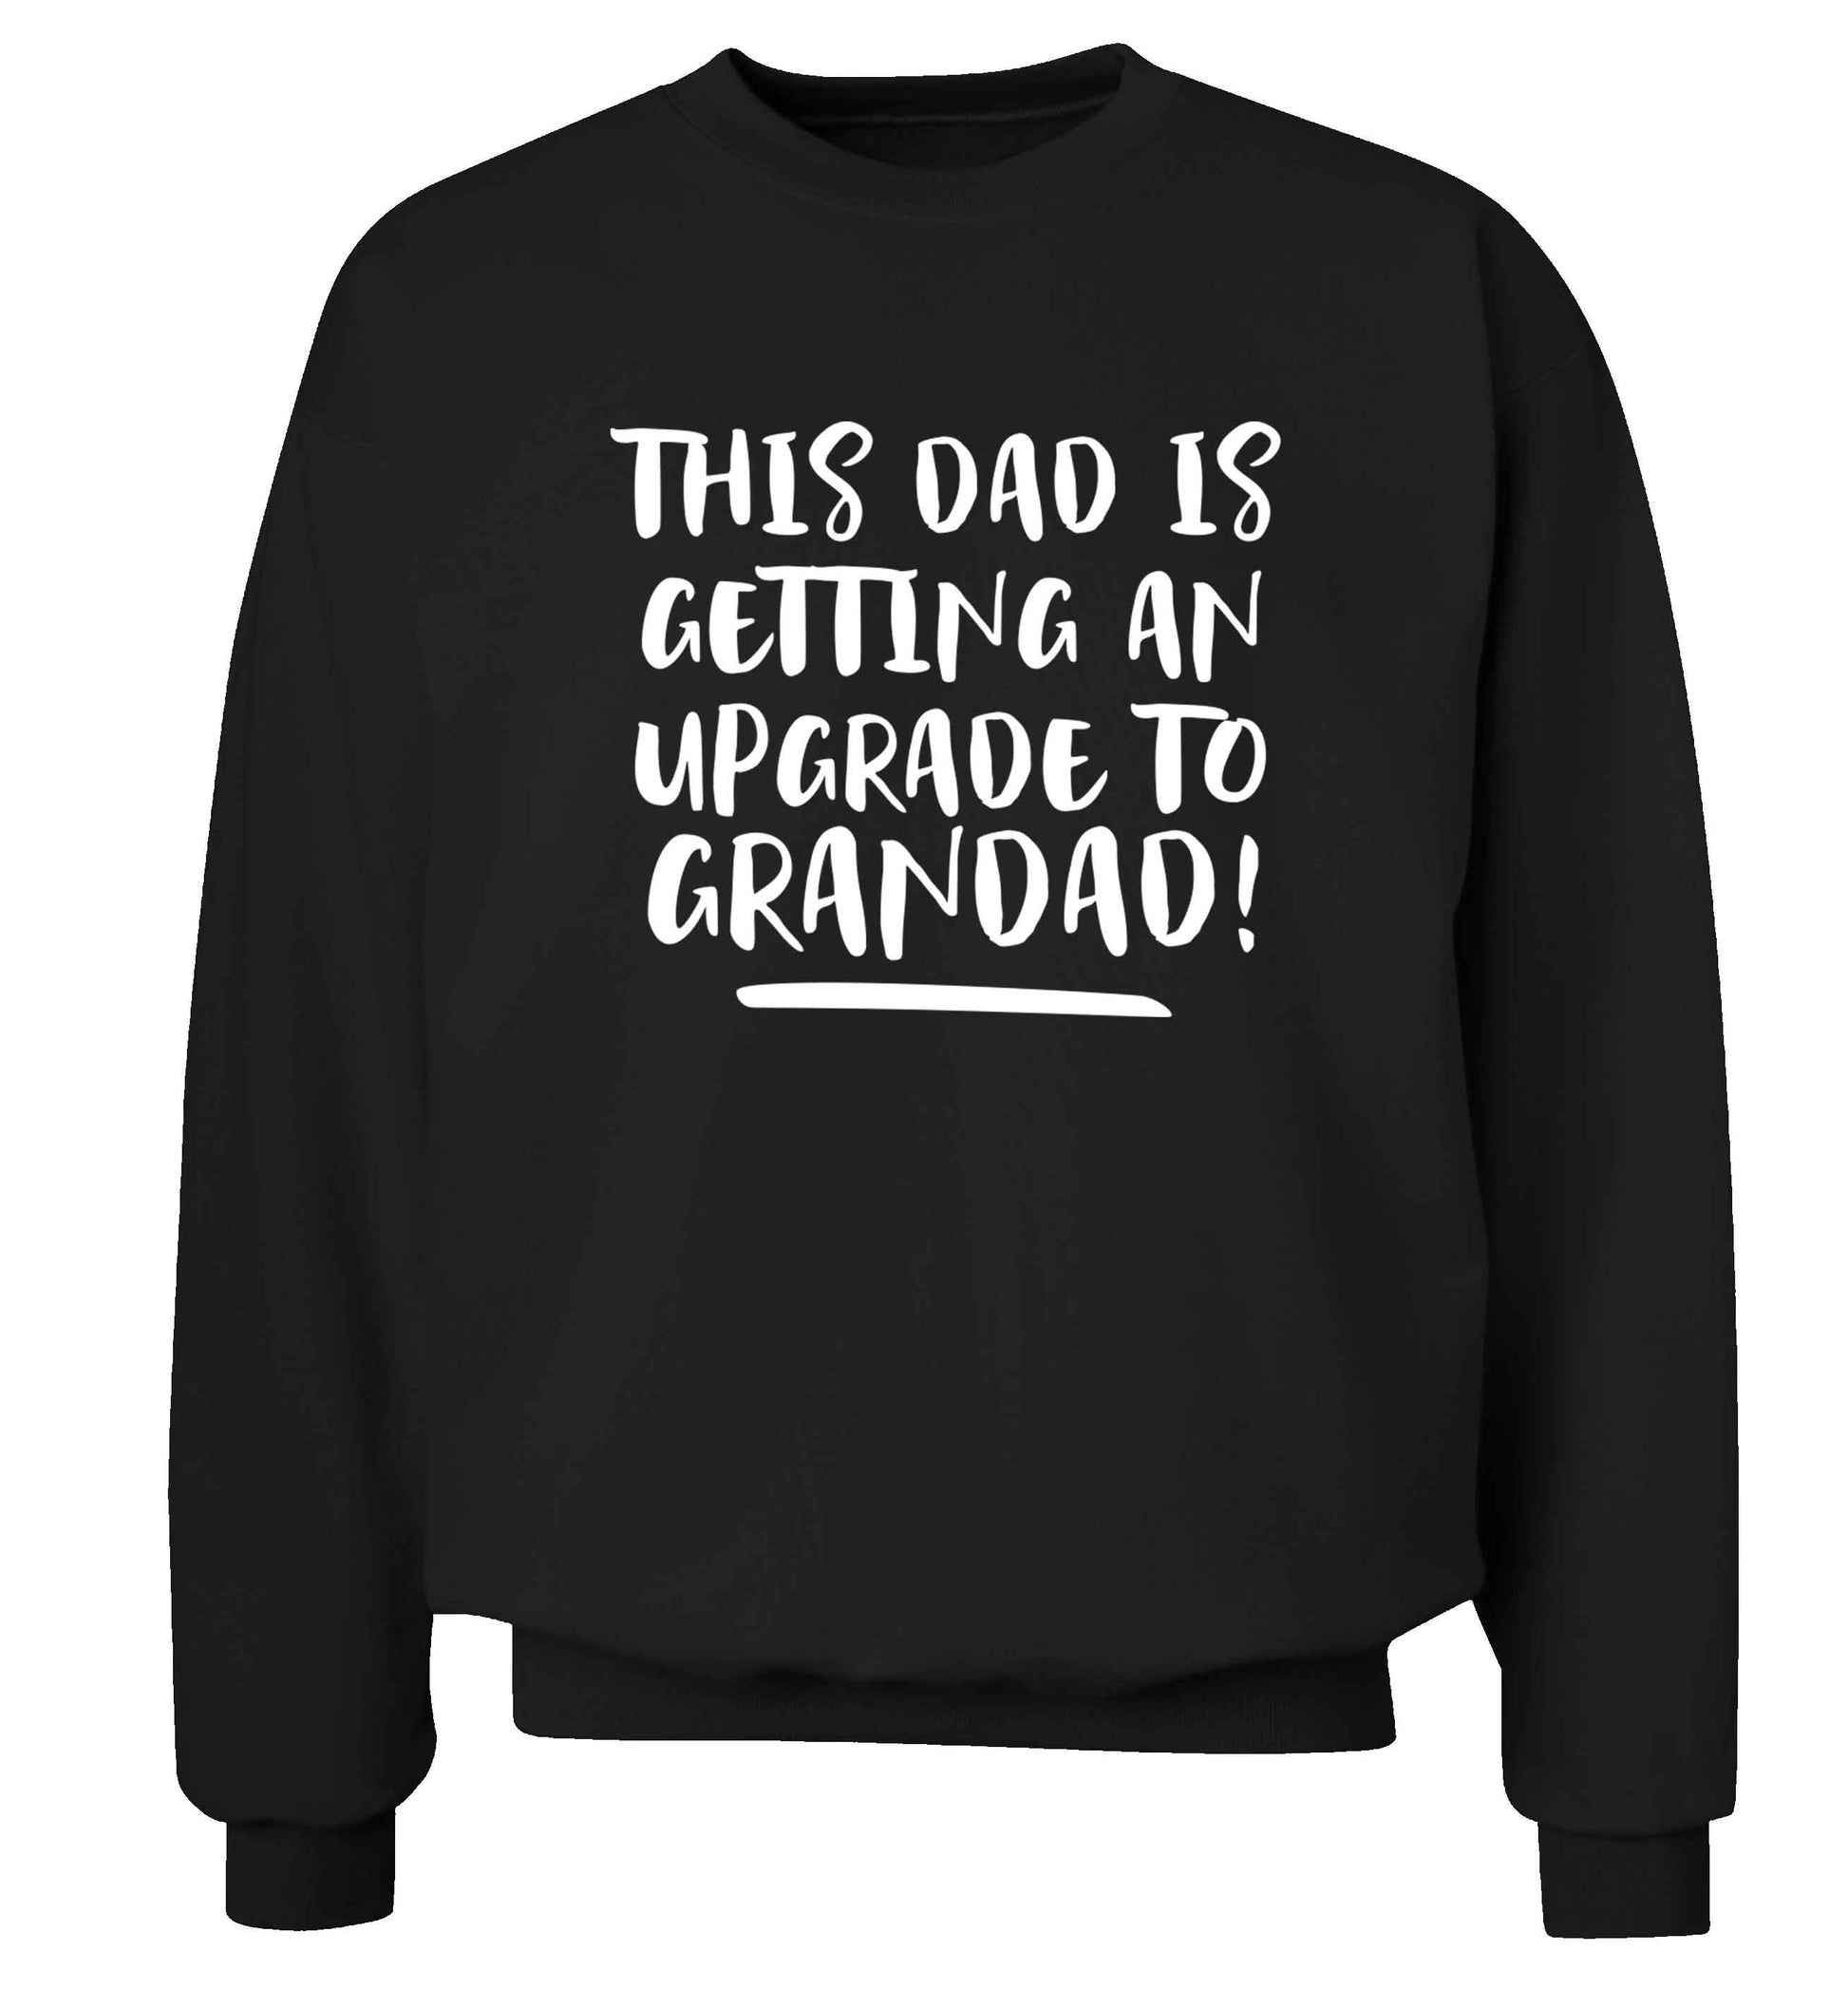 This dad is getting an upgrade to grandad! Adult's unisex black Sweater 2XL